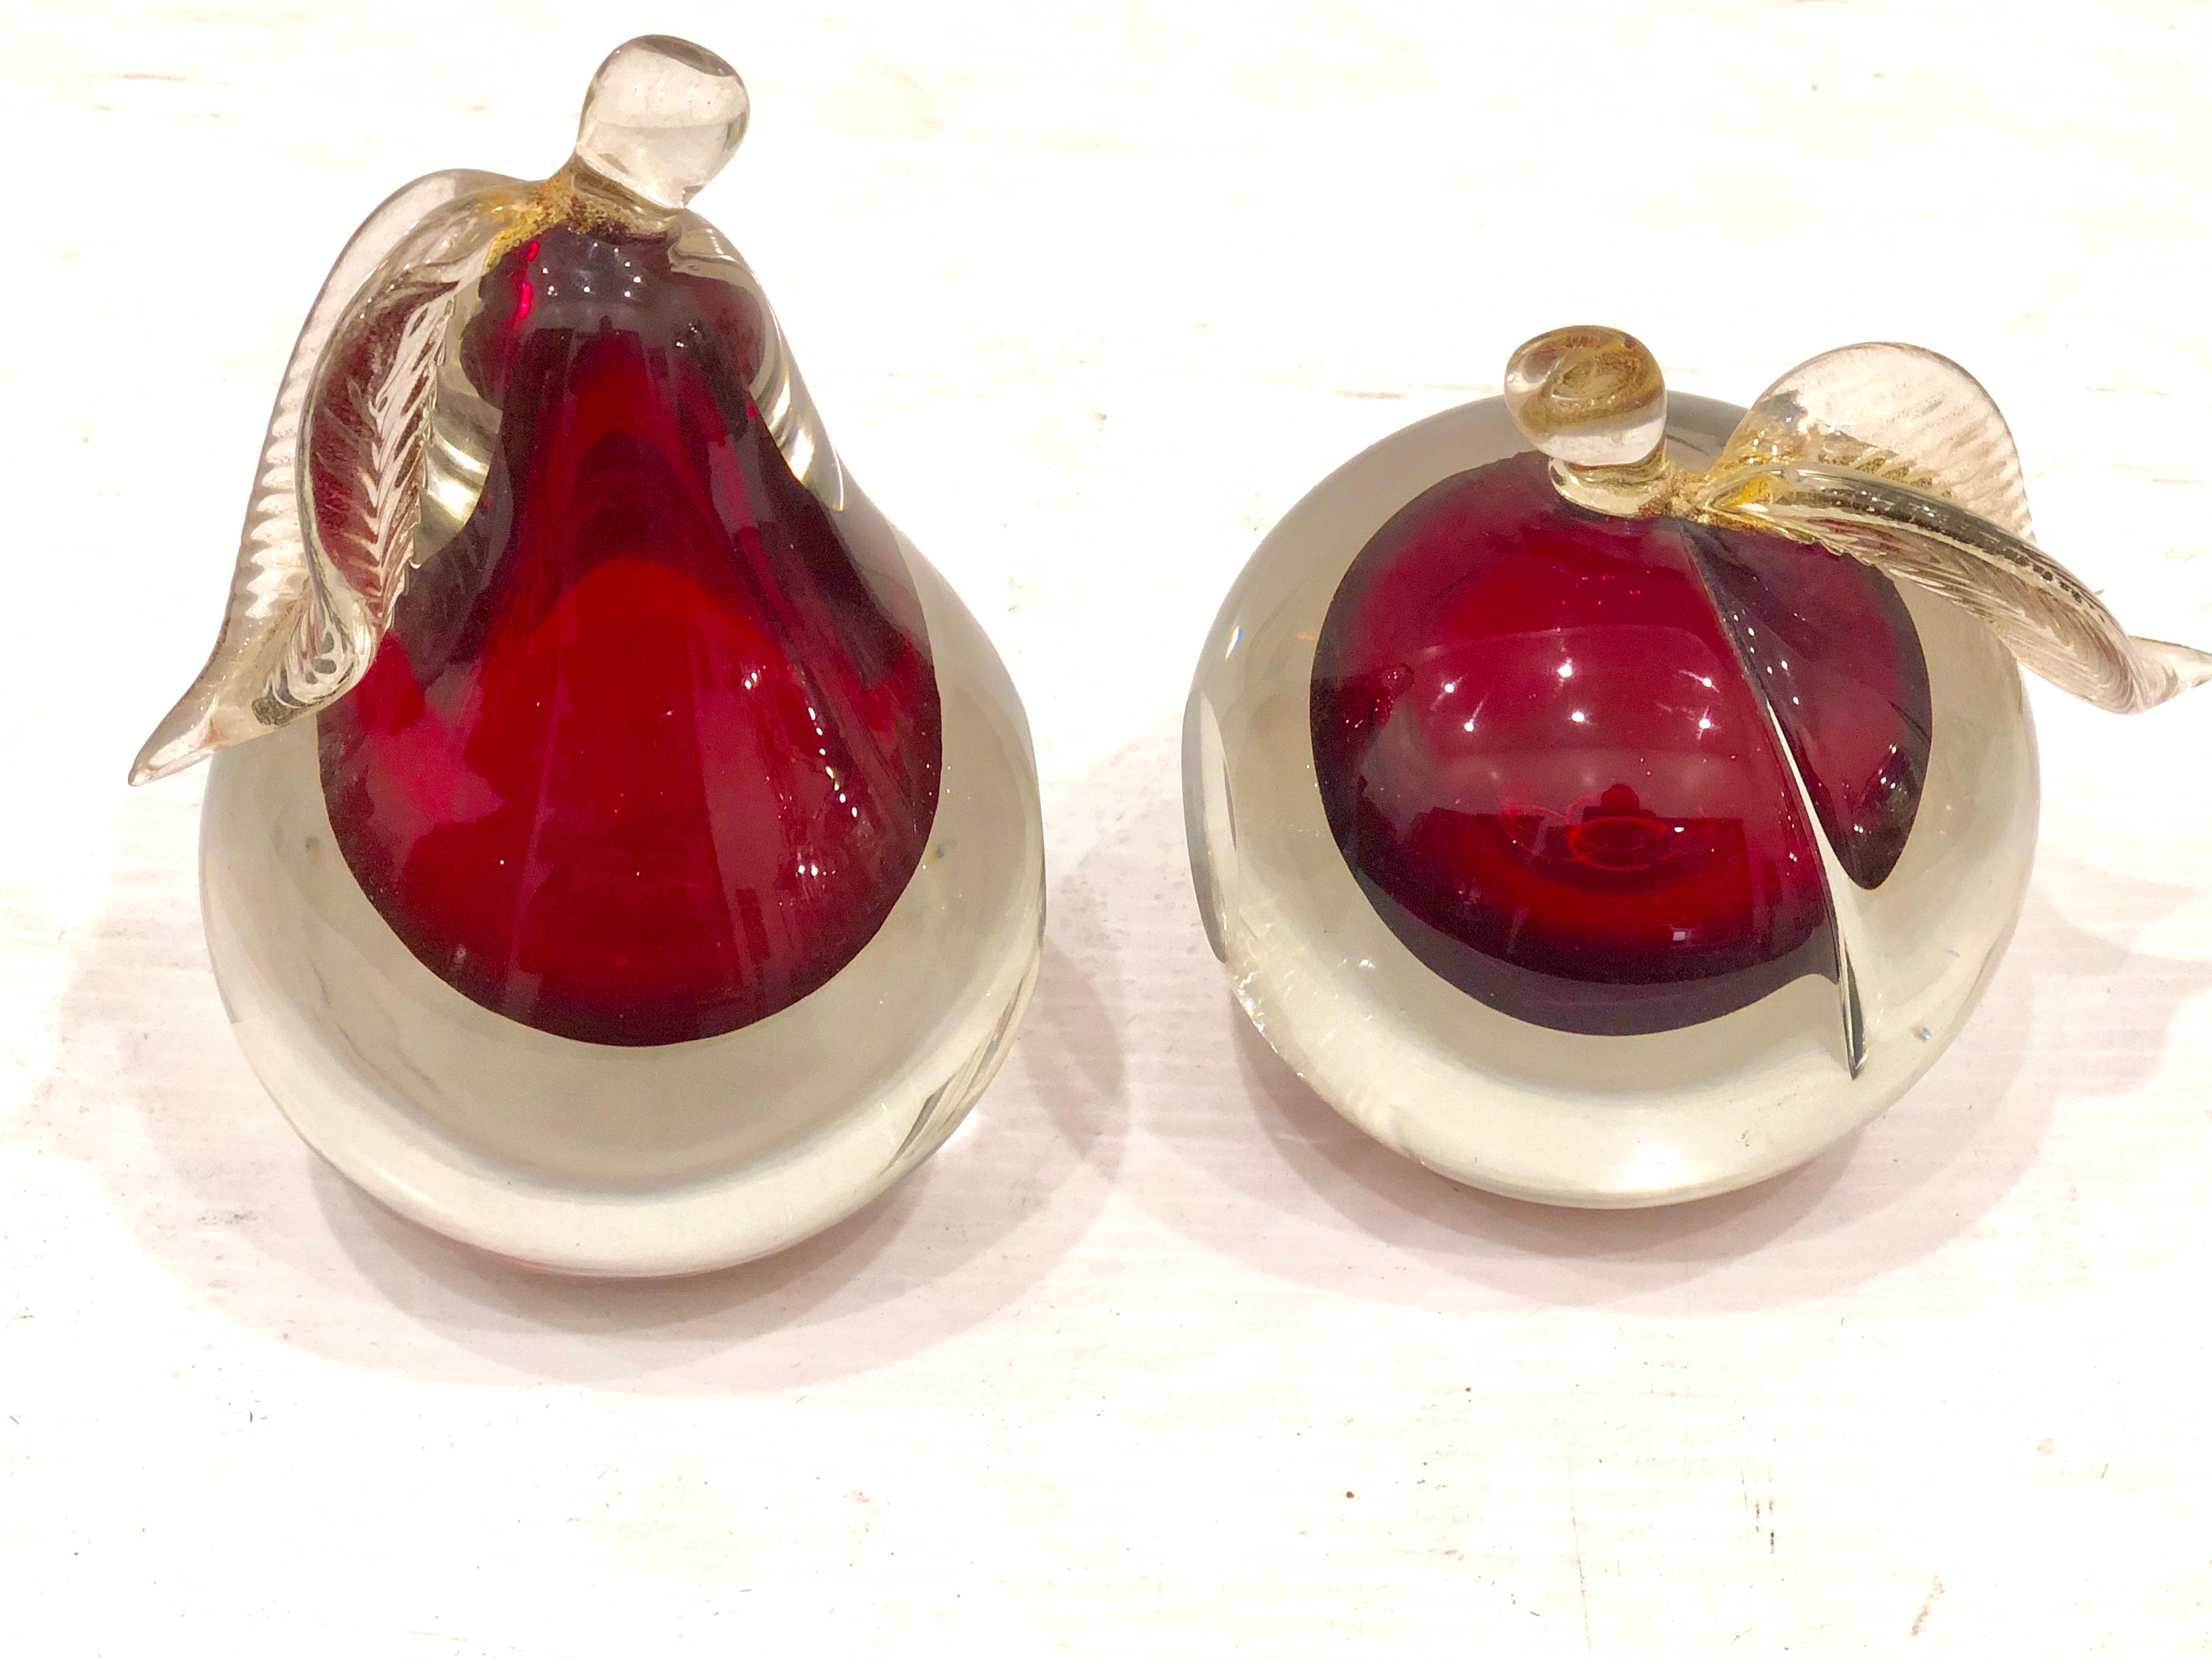 Hollywood Regency Pair of Murano Glass Fruit Bookends by Barbini Cranberry & Gold Gliter Combo